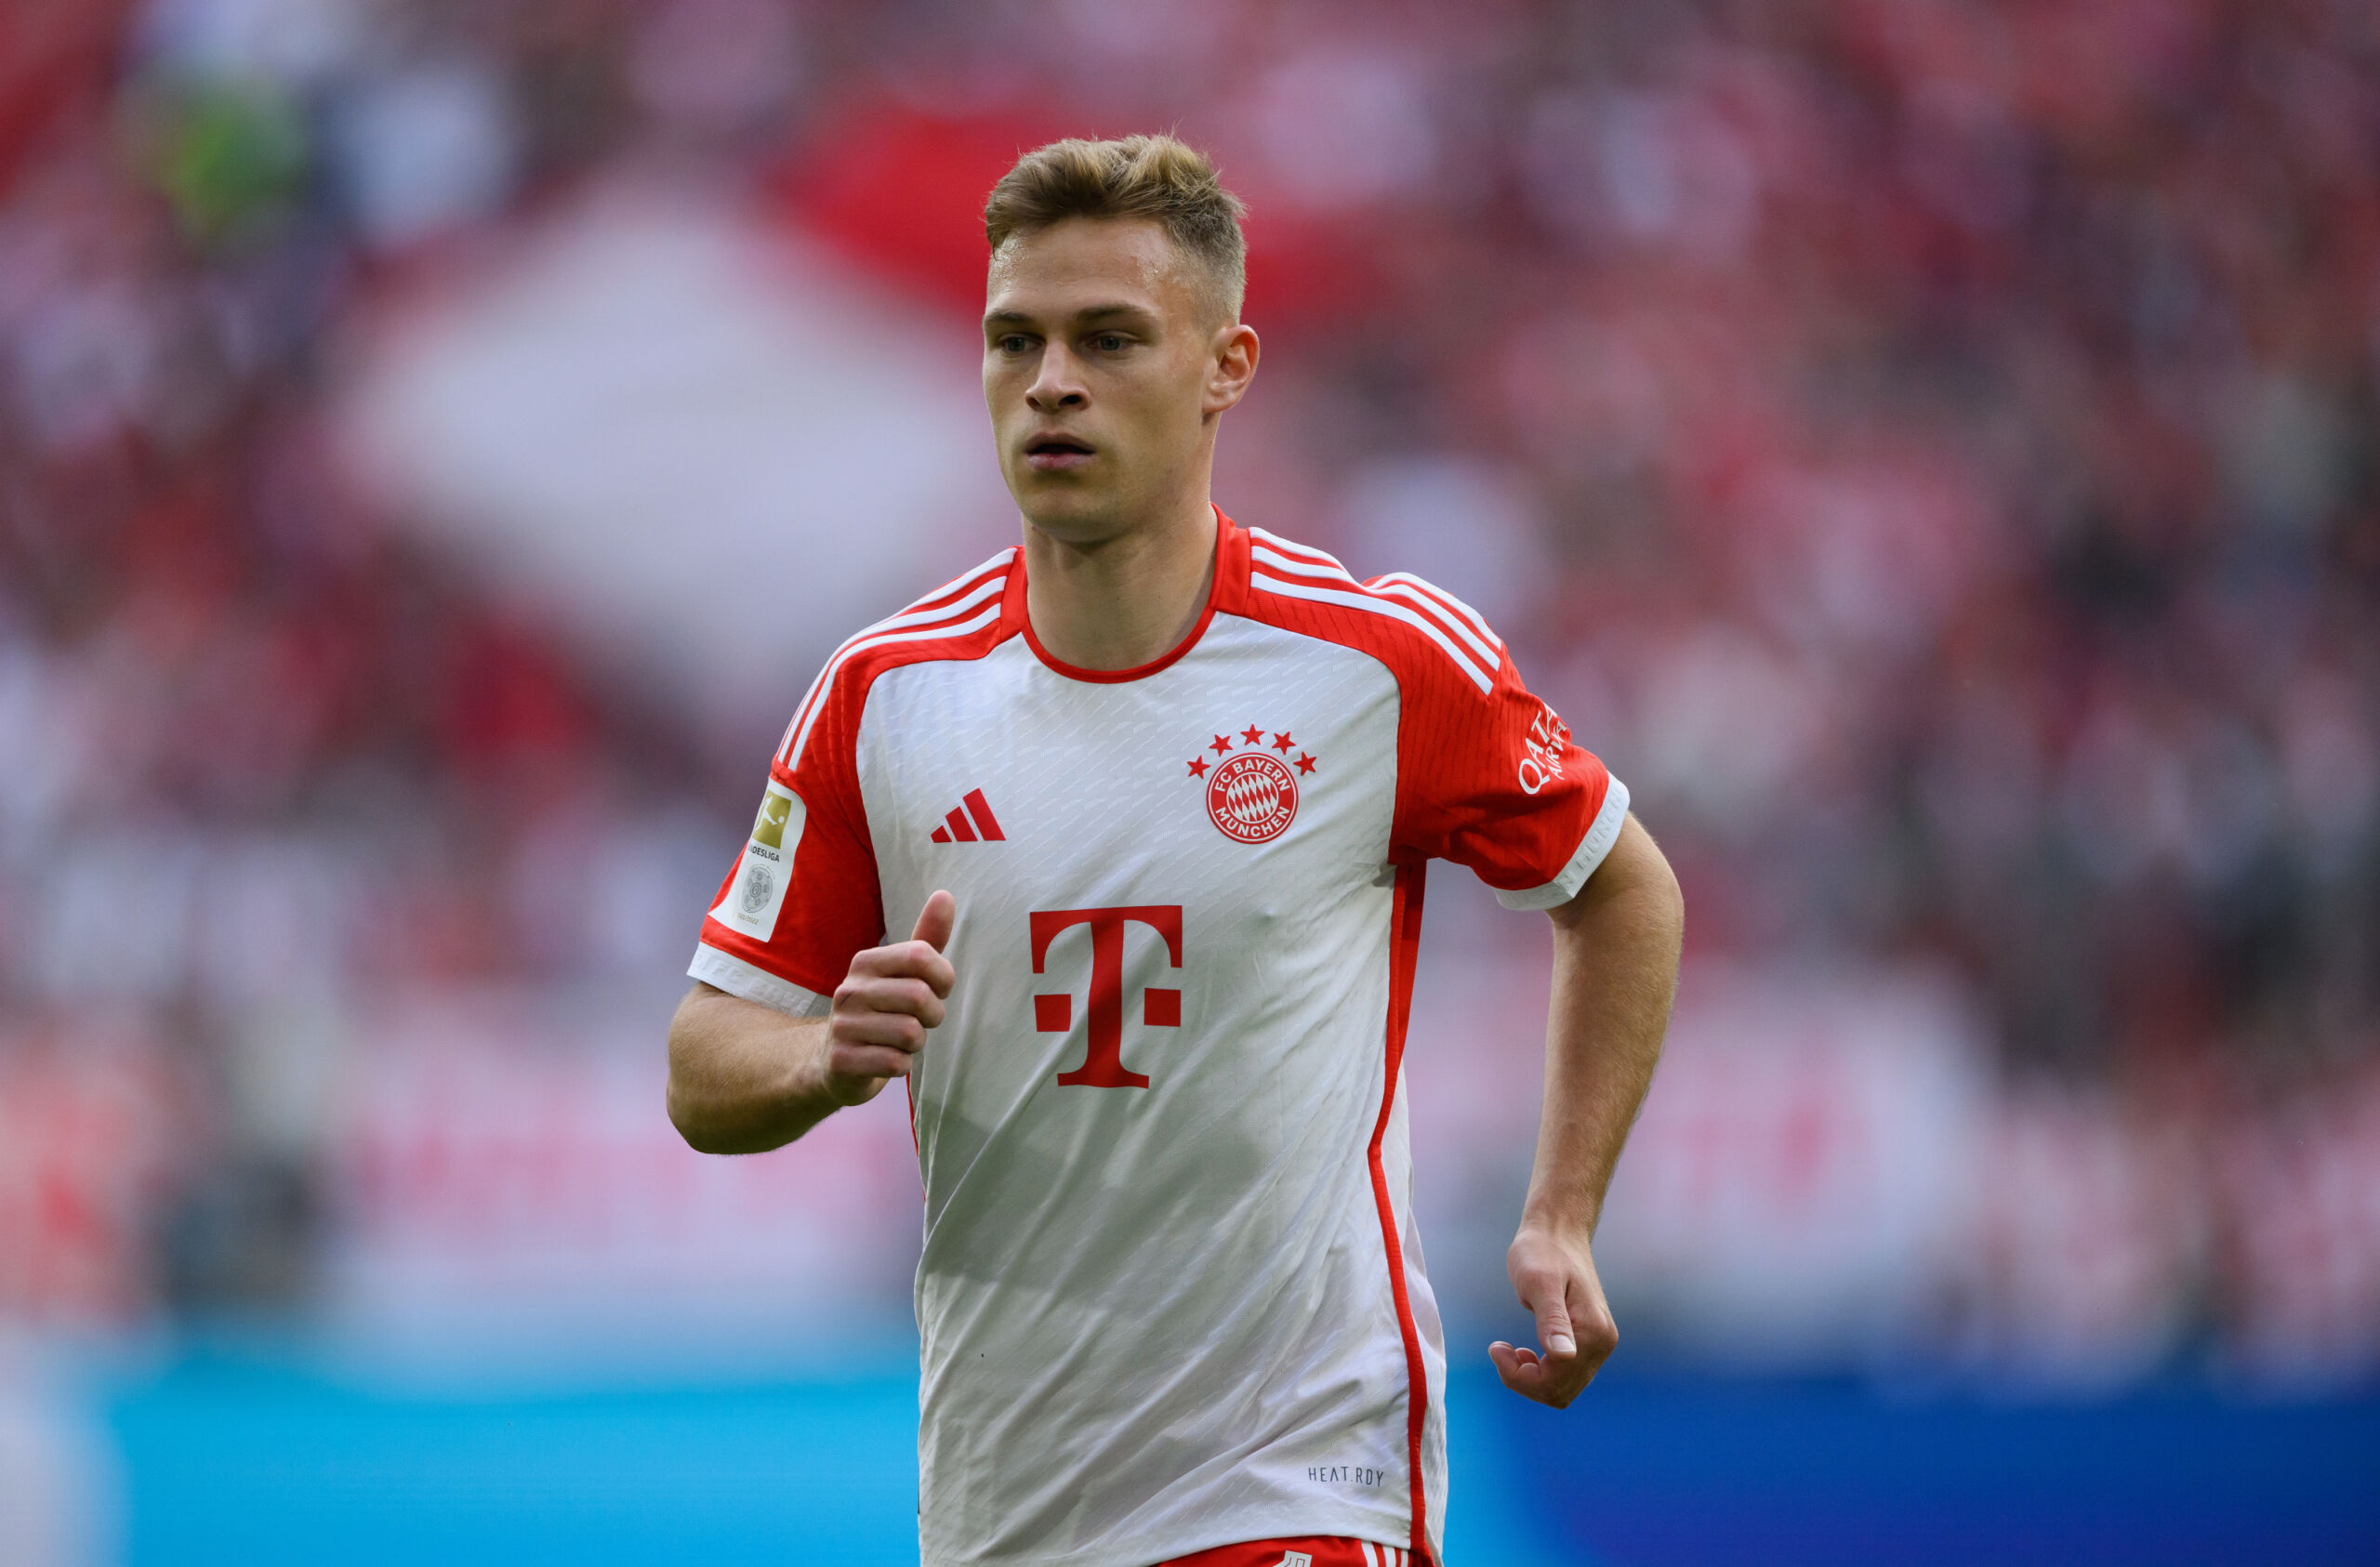 MUNICH, GERMANY - MAY 20: Joshua Kimmich of Bayern Munich in action during the Bundesliga match between FC Bayern München and RB Leipzig at Allianz Arena on May 20, 2023 in Munich, Germany. (Photo by Matthias Hangst/Getty Images)